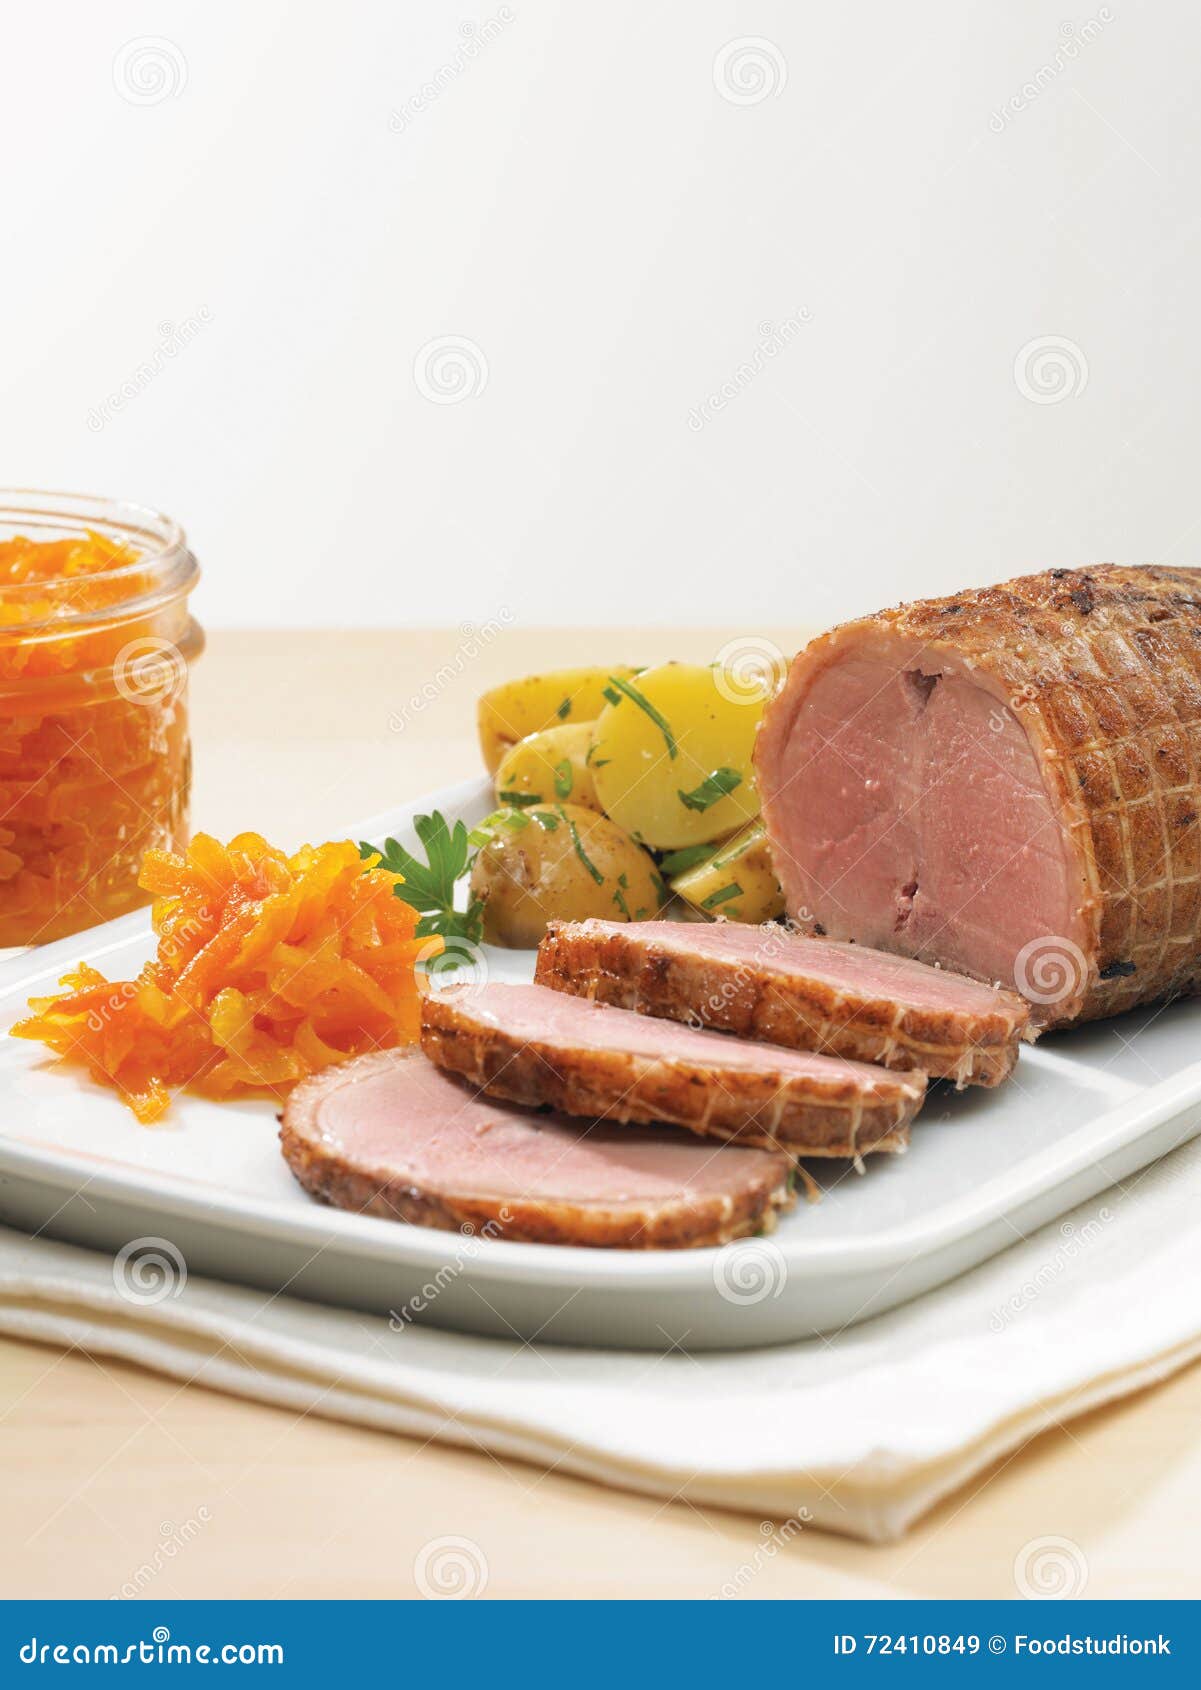 Duck Roast with Carrot Rum Jam and Potatoes Stock Image - Image of ...